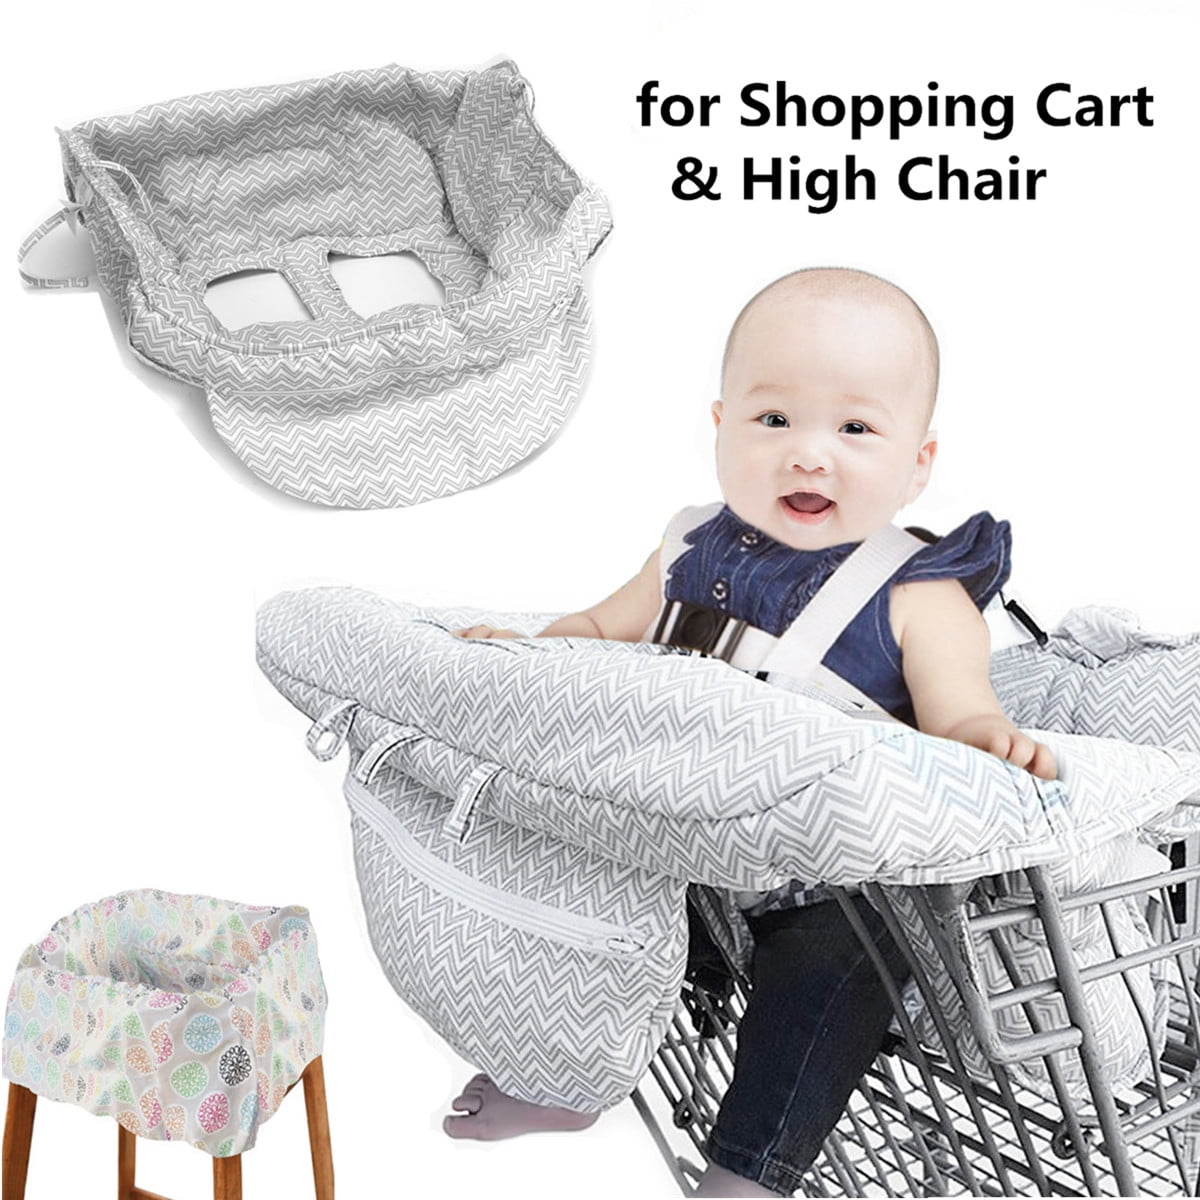 Baby Shopping Supermarket Trolley Cart Seat  Child High Chair Cover Protecor @D 